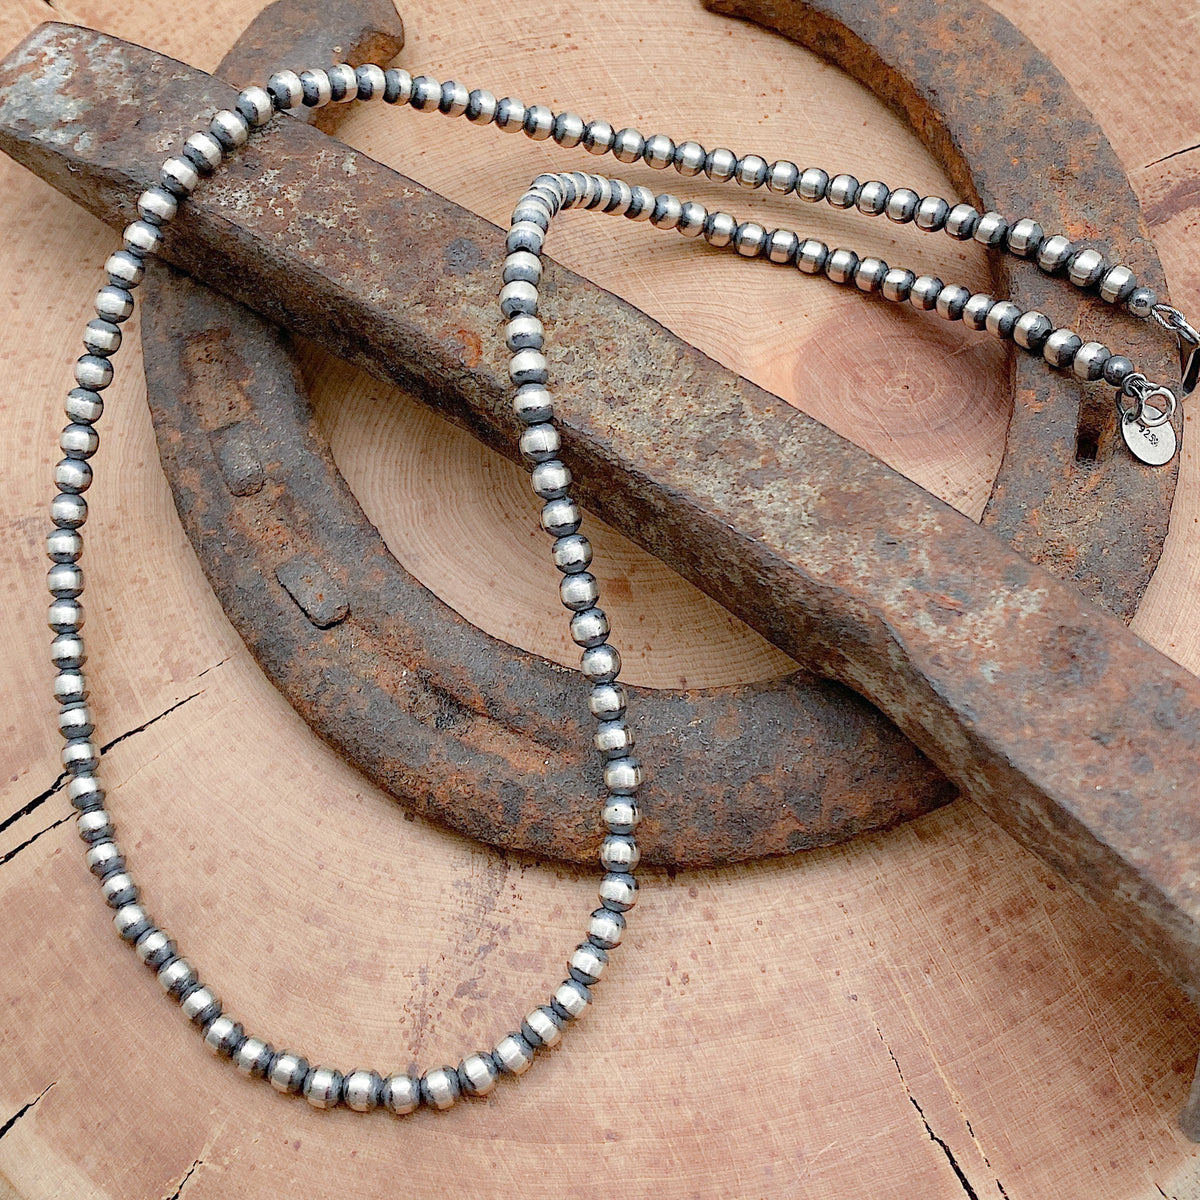 Sterling silver hand crafted necklace that features 3mm beads, an antiqued finish and has a hook and eye clasp.